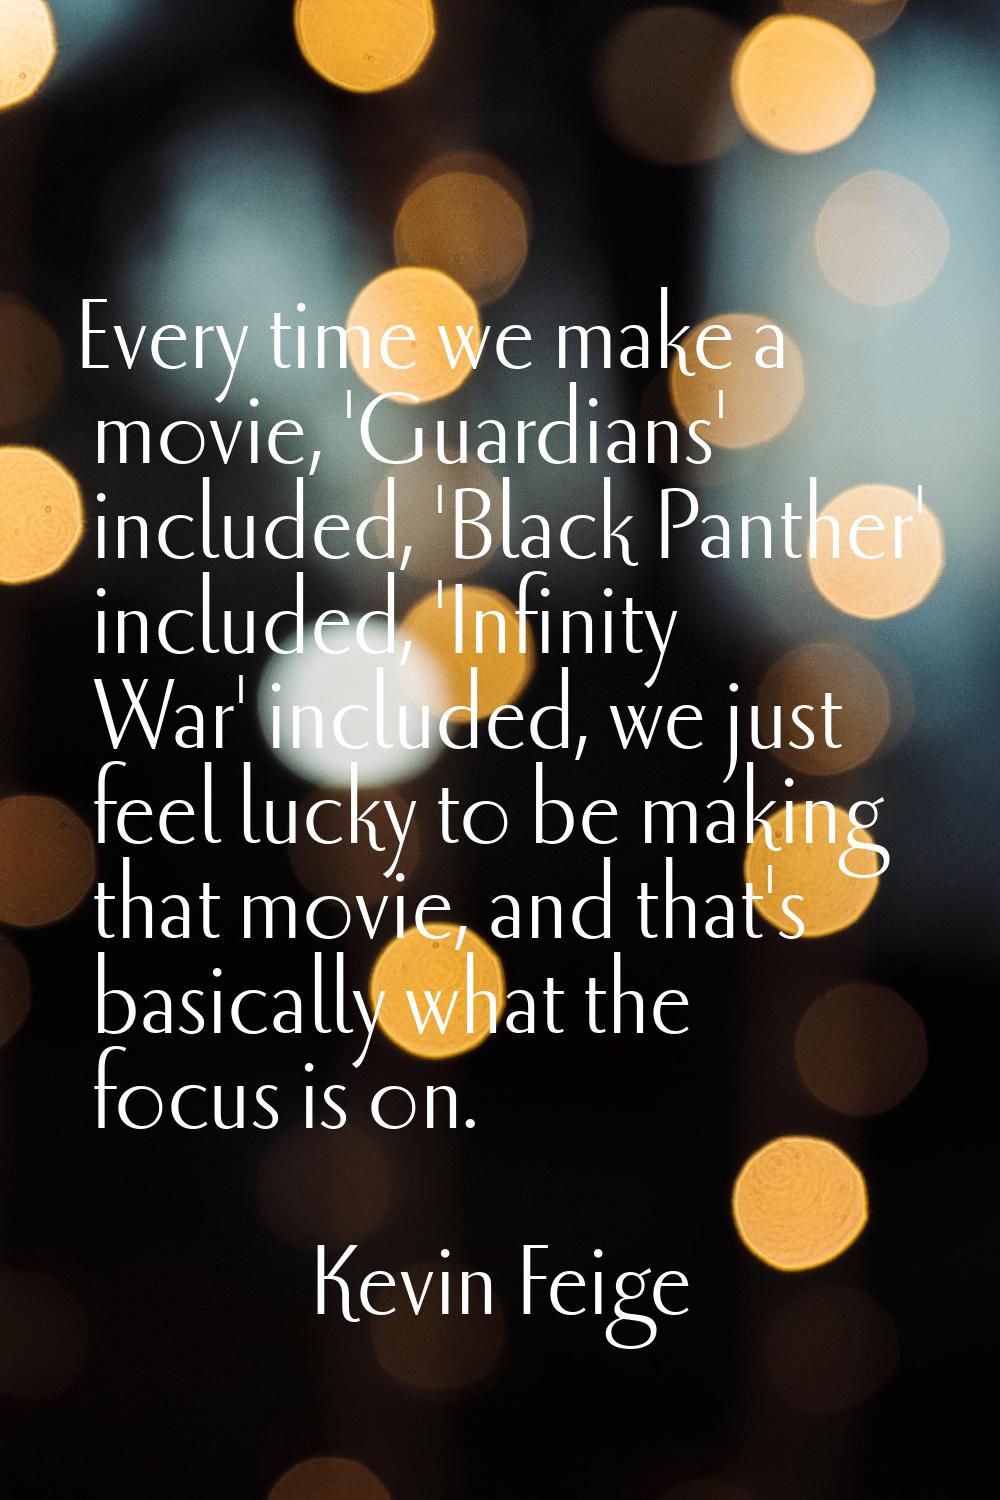 Every time we make a movie, 'Guardians' included, 'Black Panther' included, 'Infinity War' included